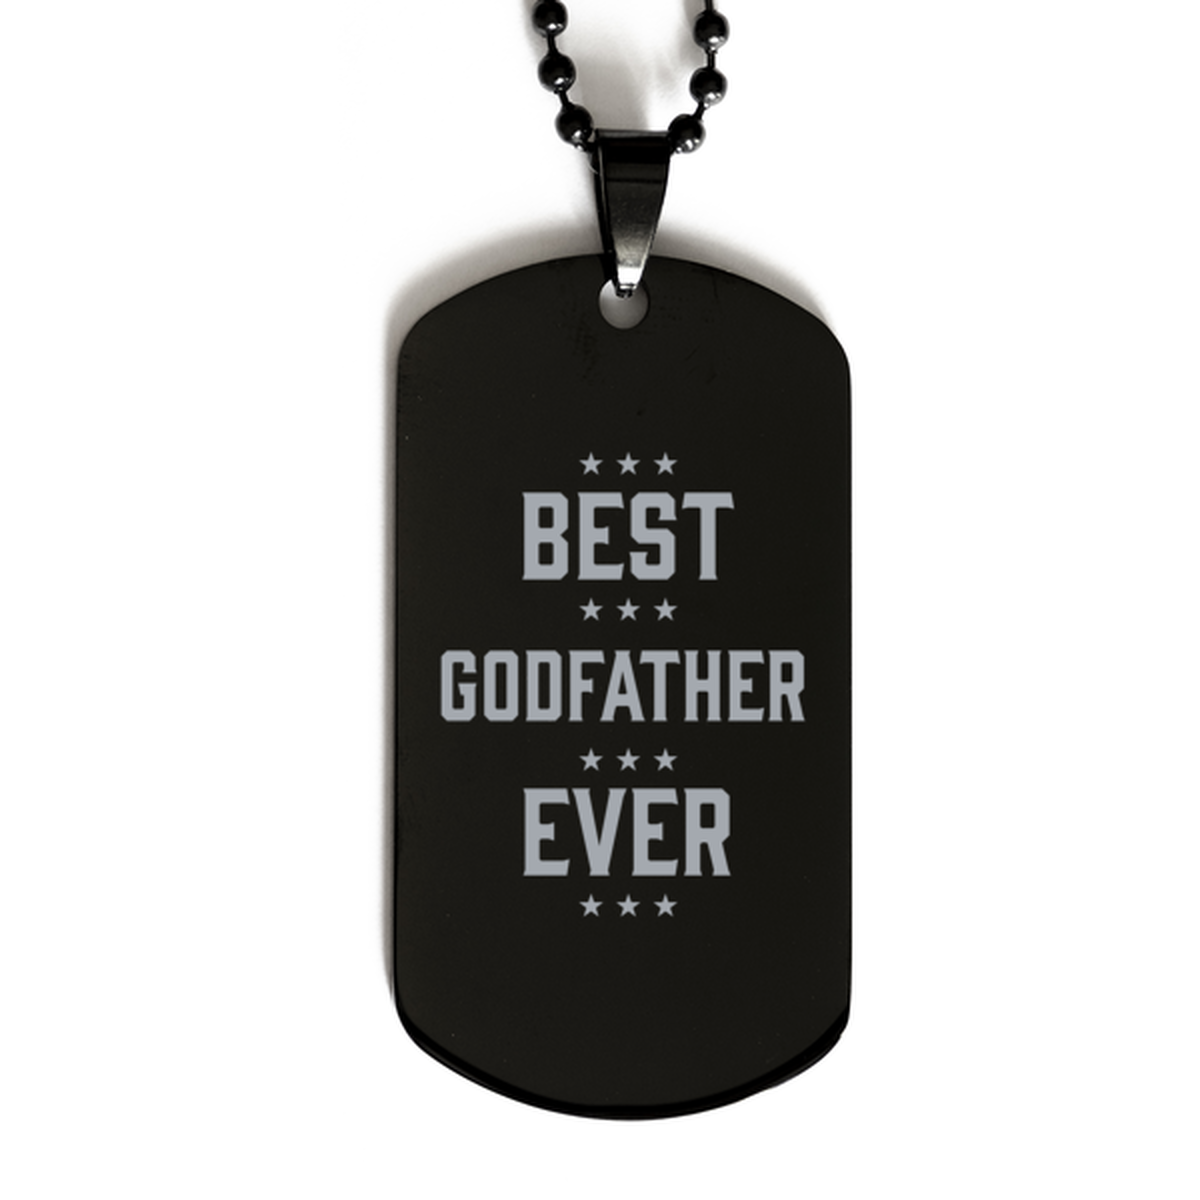 Best Godfather Ever Godfather Gifts, Funny Black Dog Tag For Godfather, Birthday Family Presents Engraved Necklace For Men